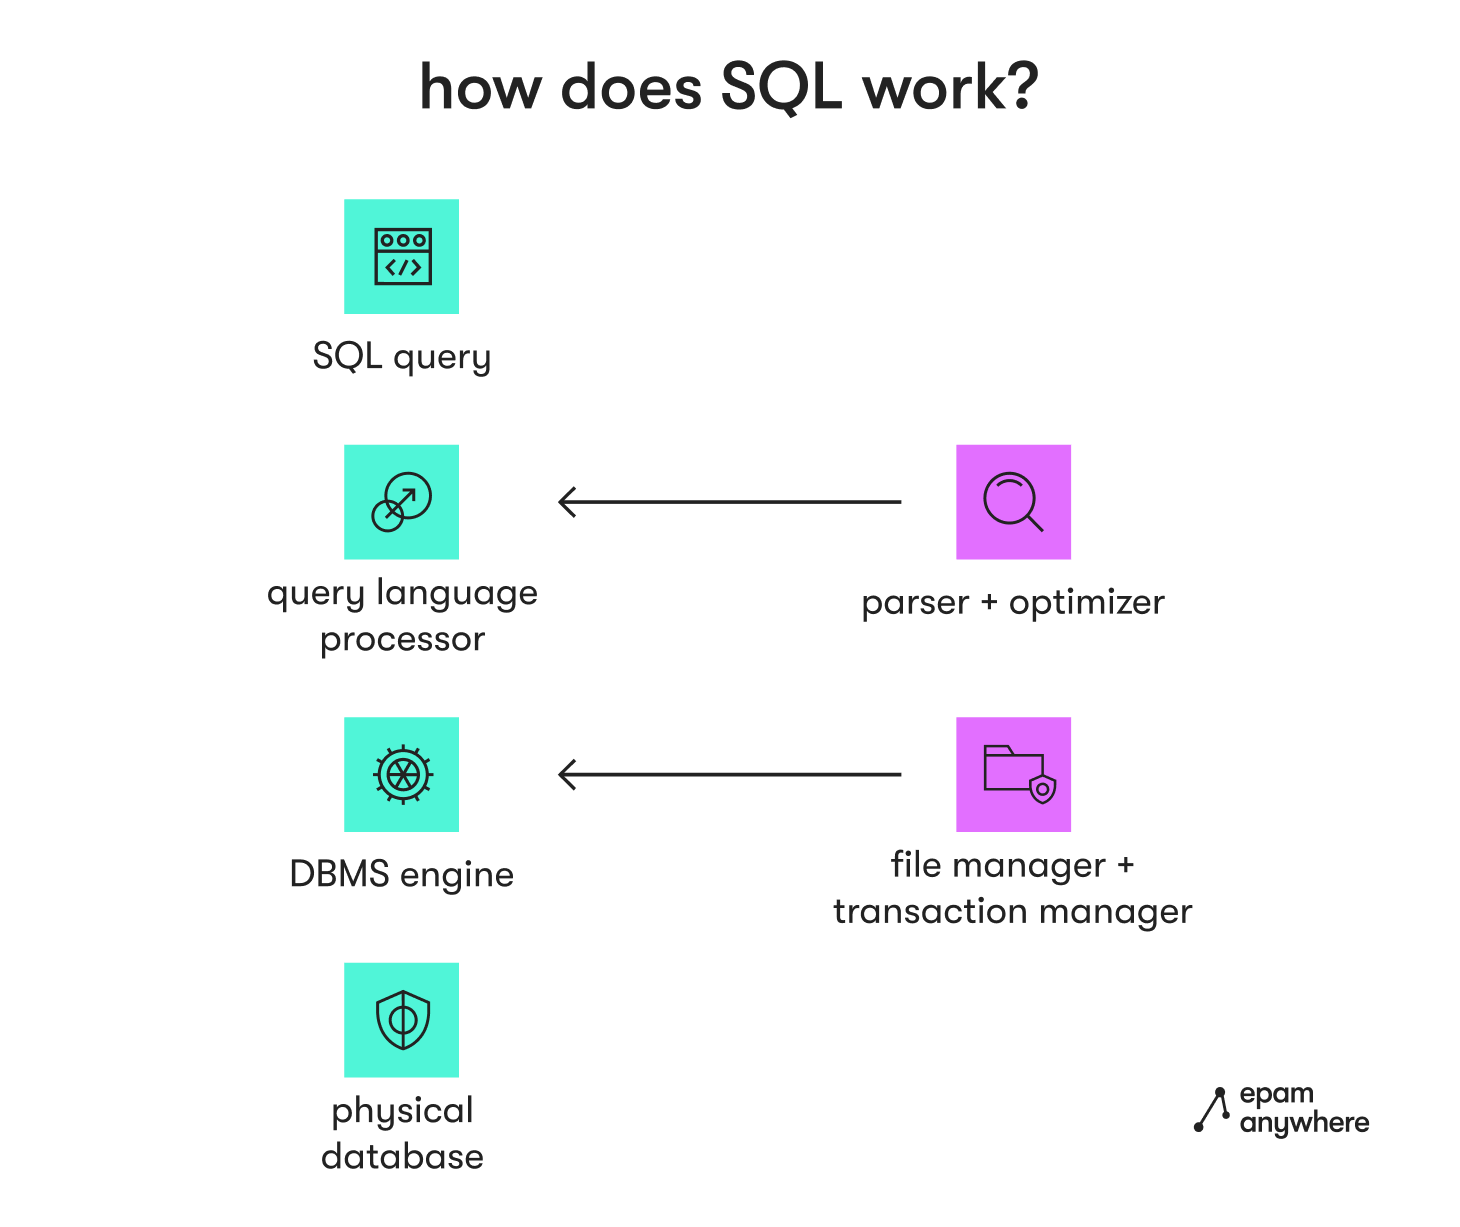 How does SQL work diagram